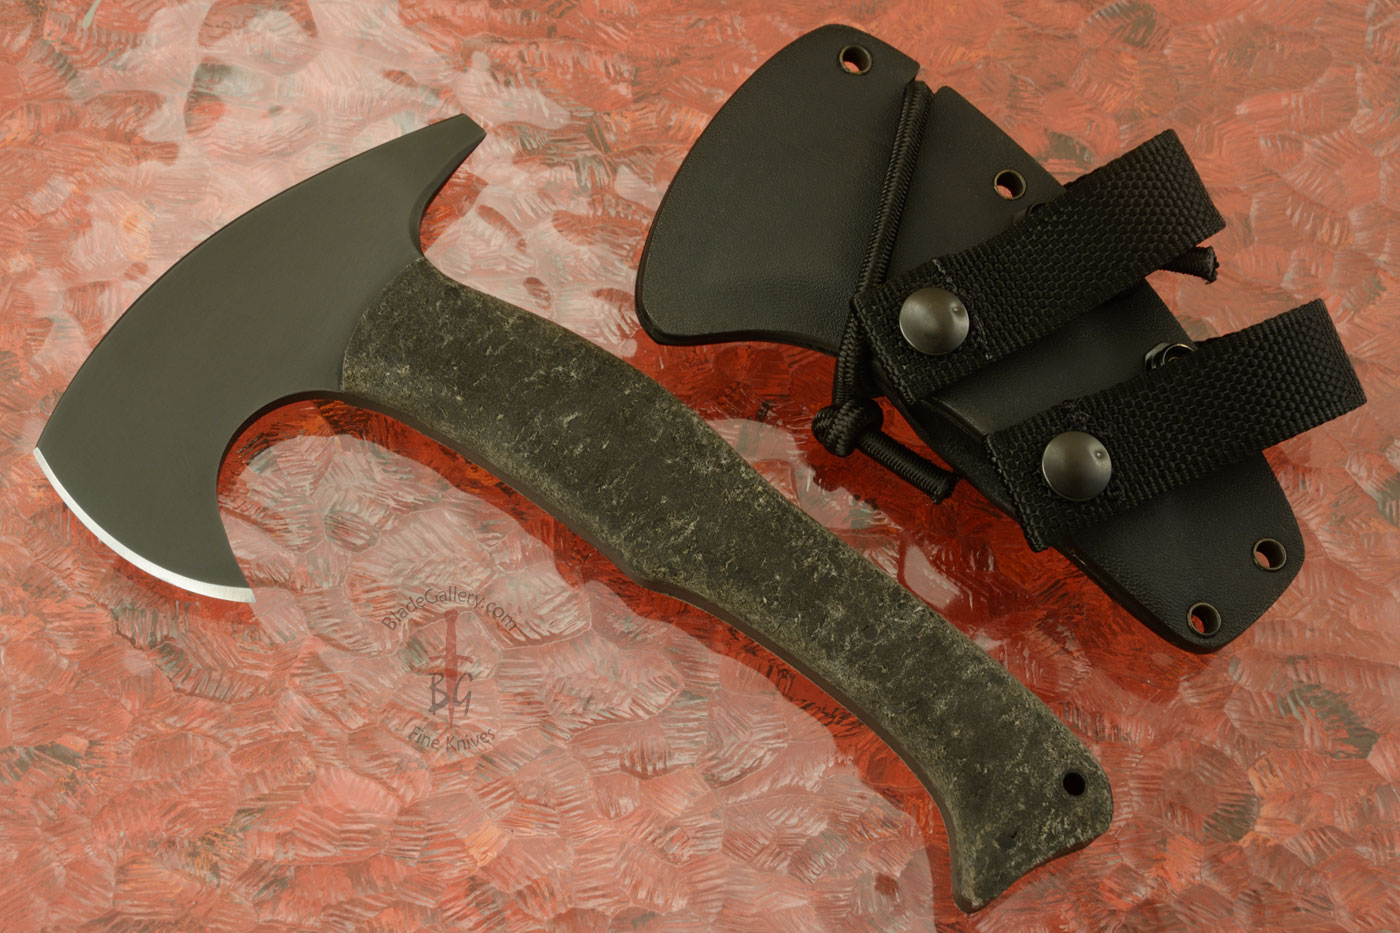 Stealth Axe LT with Rubber Handle